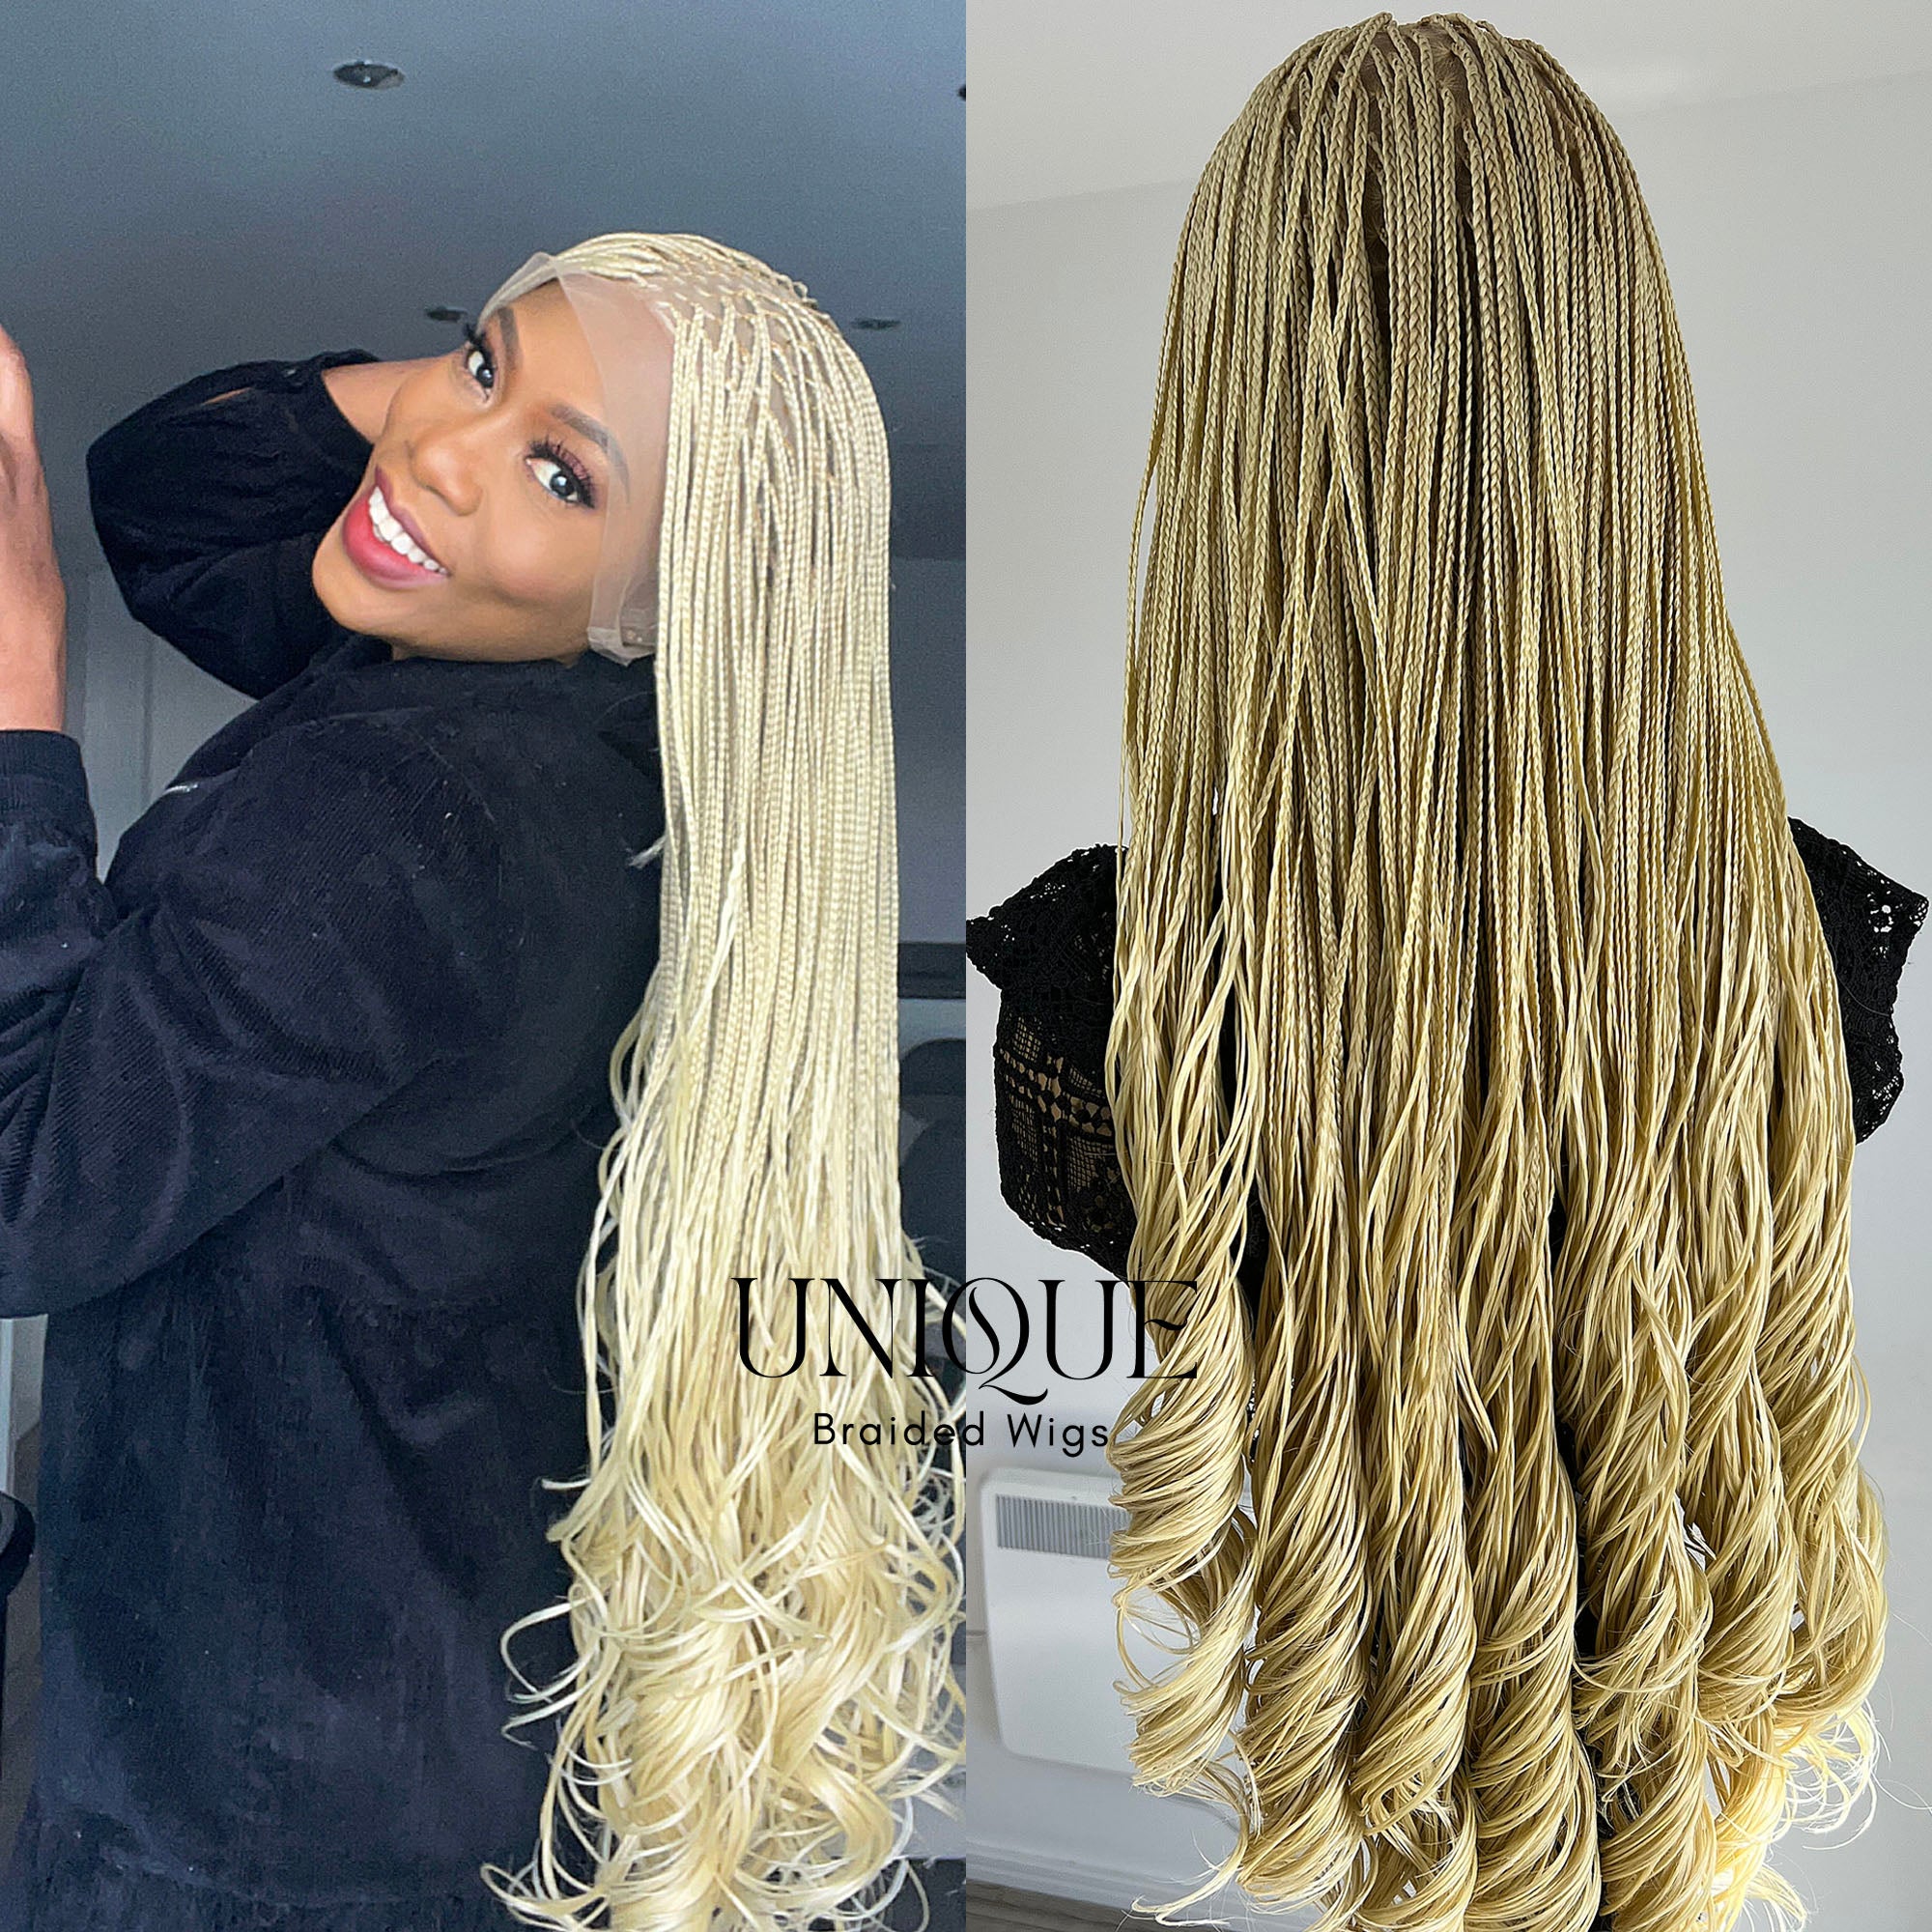 Small Knotless Box Braids with Curls, Braid Wigs for Women